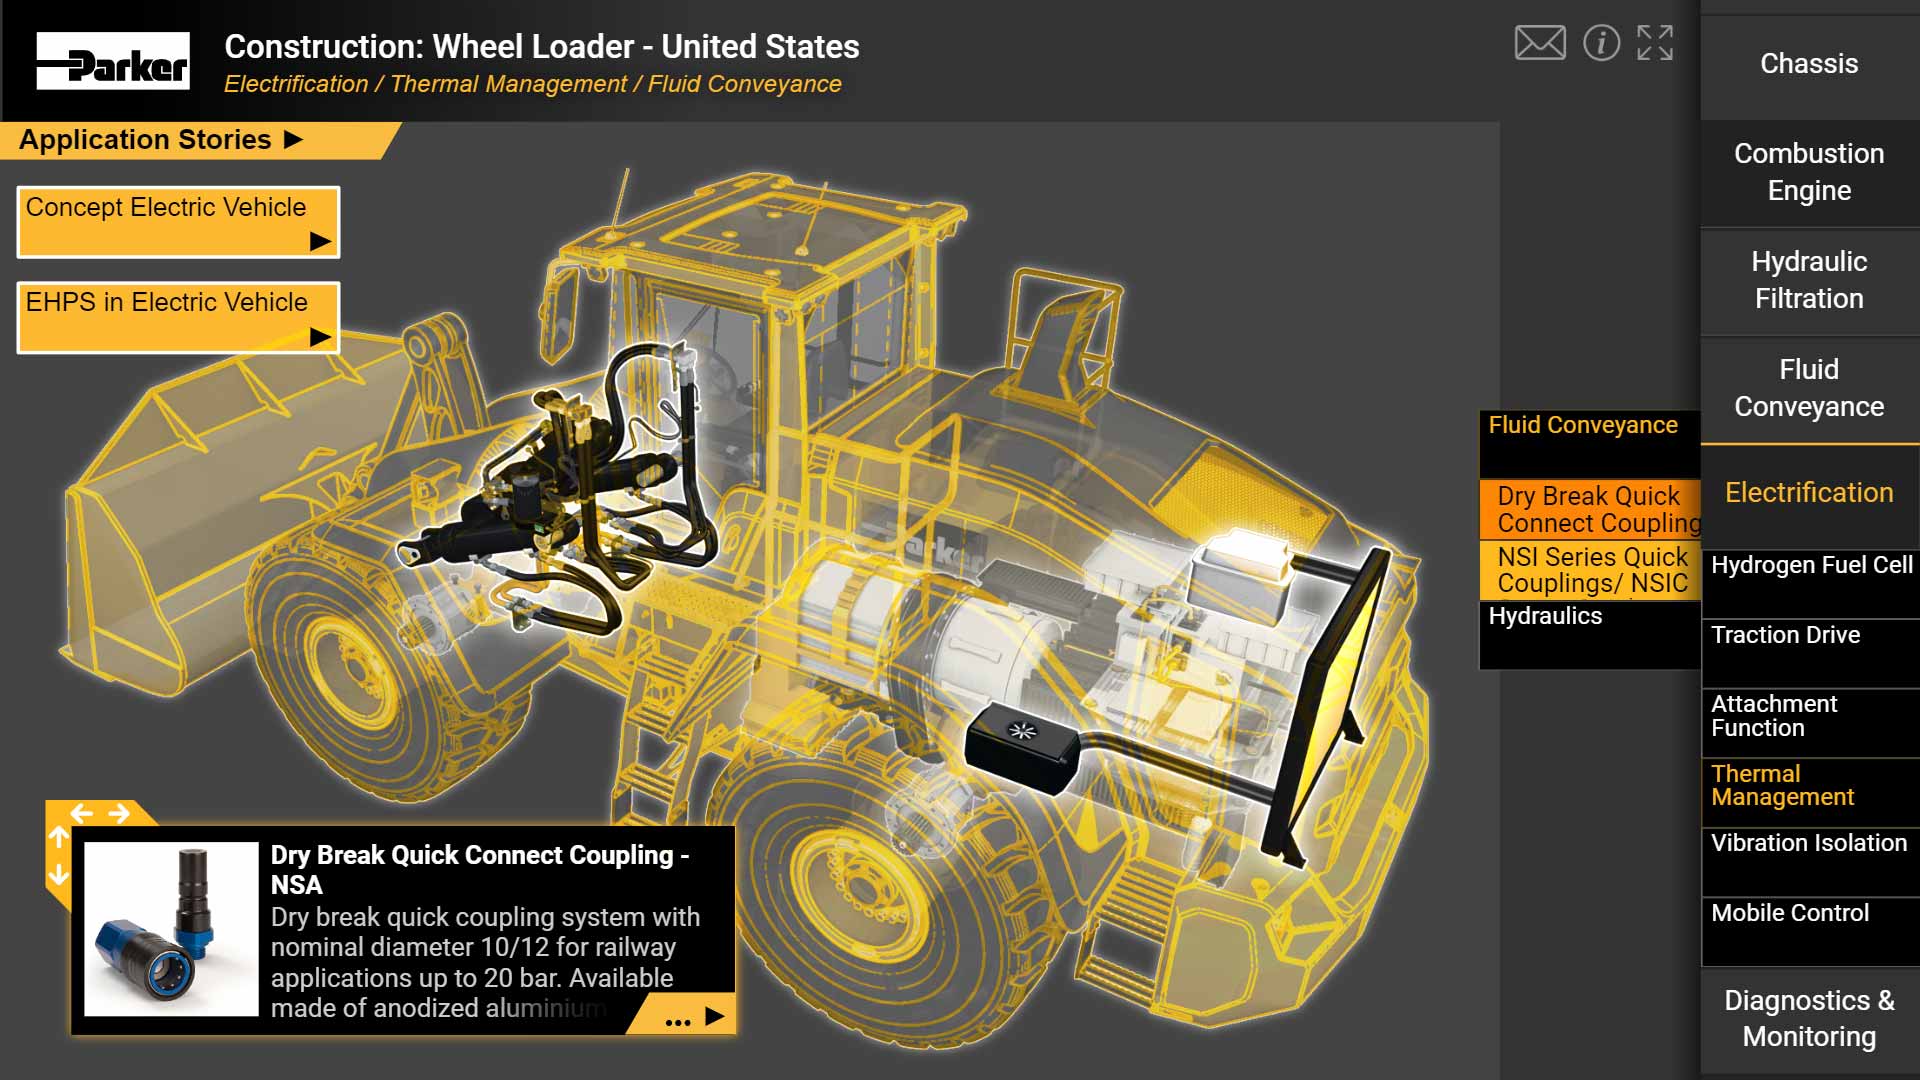 North America Off Road Machinery - Wheel Loader Equipment and Products Industrial OEM Equipment Manufacturer